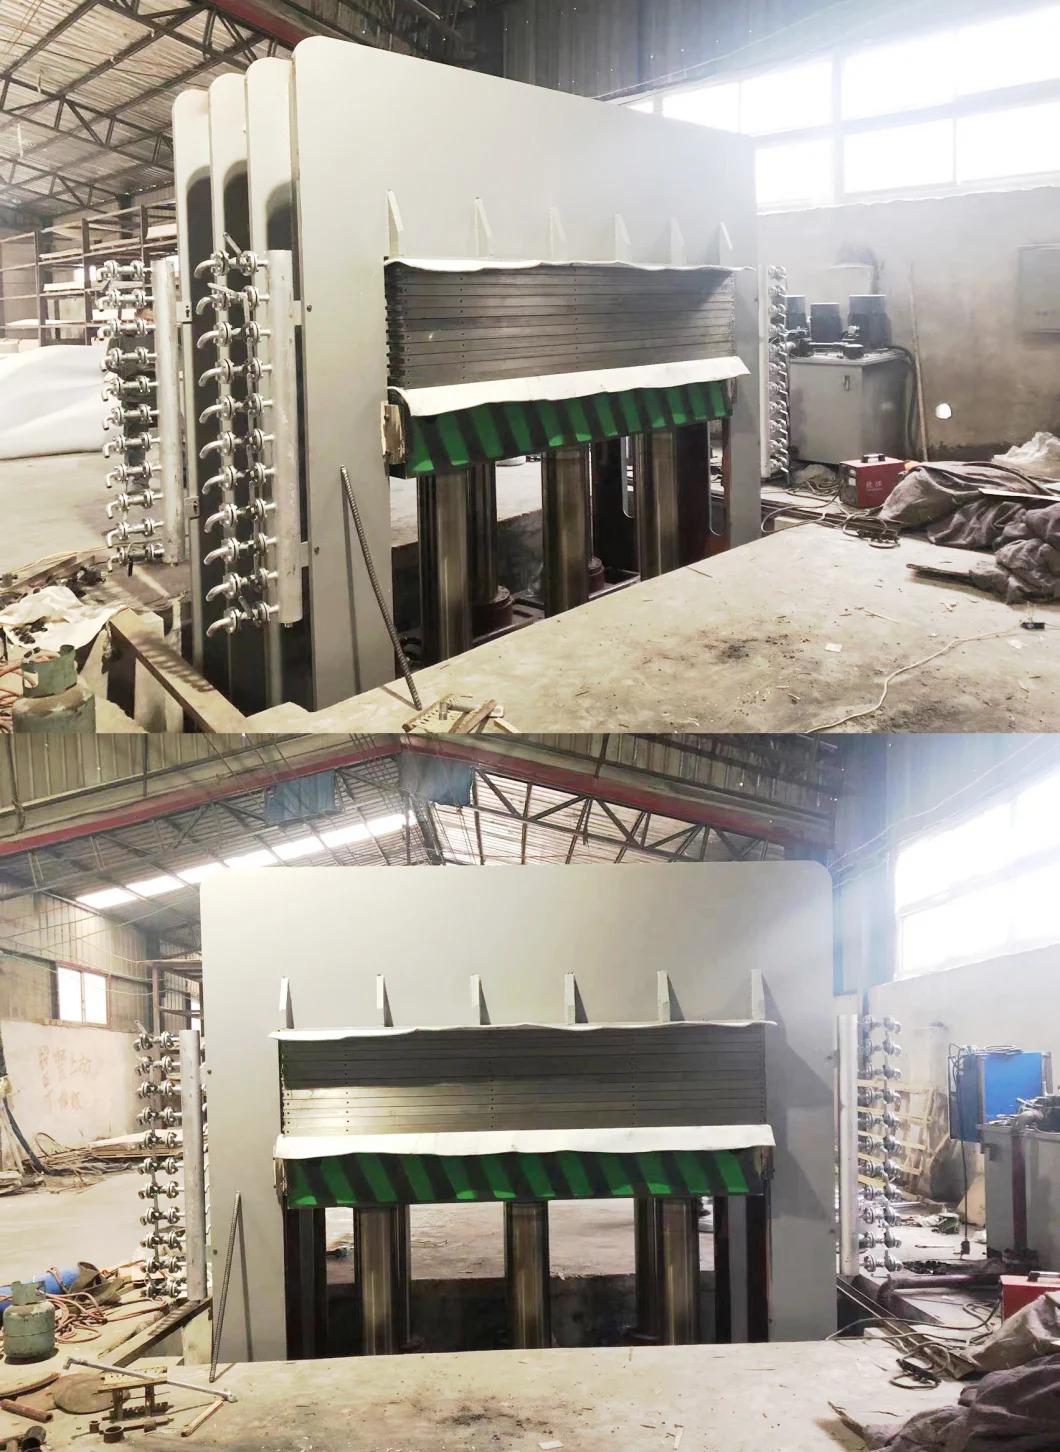 Plywood Heating Hot Press Machine Woodworking Machinery for Plywood Factory